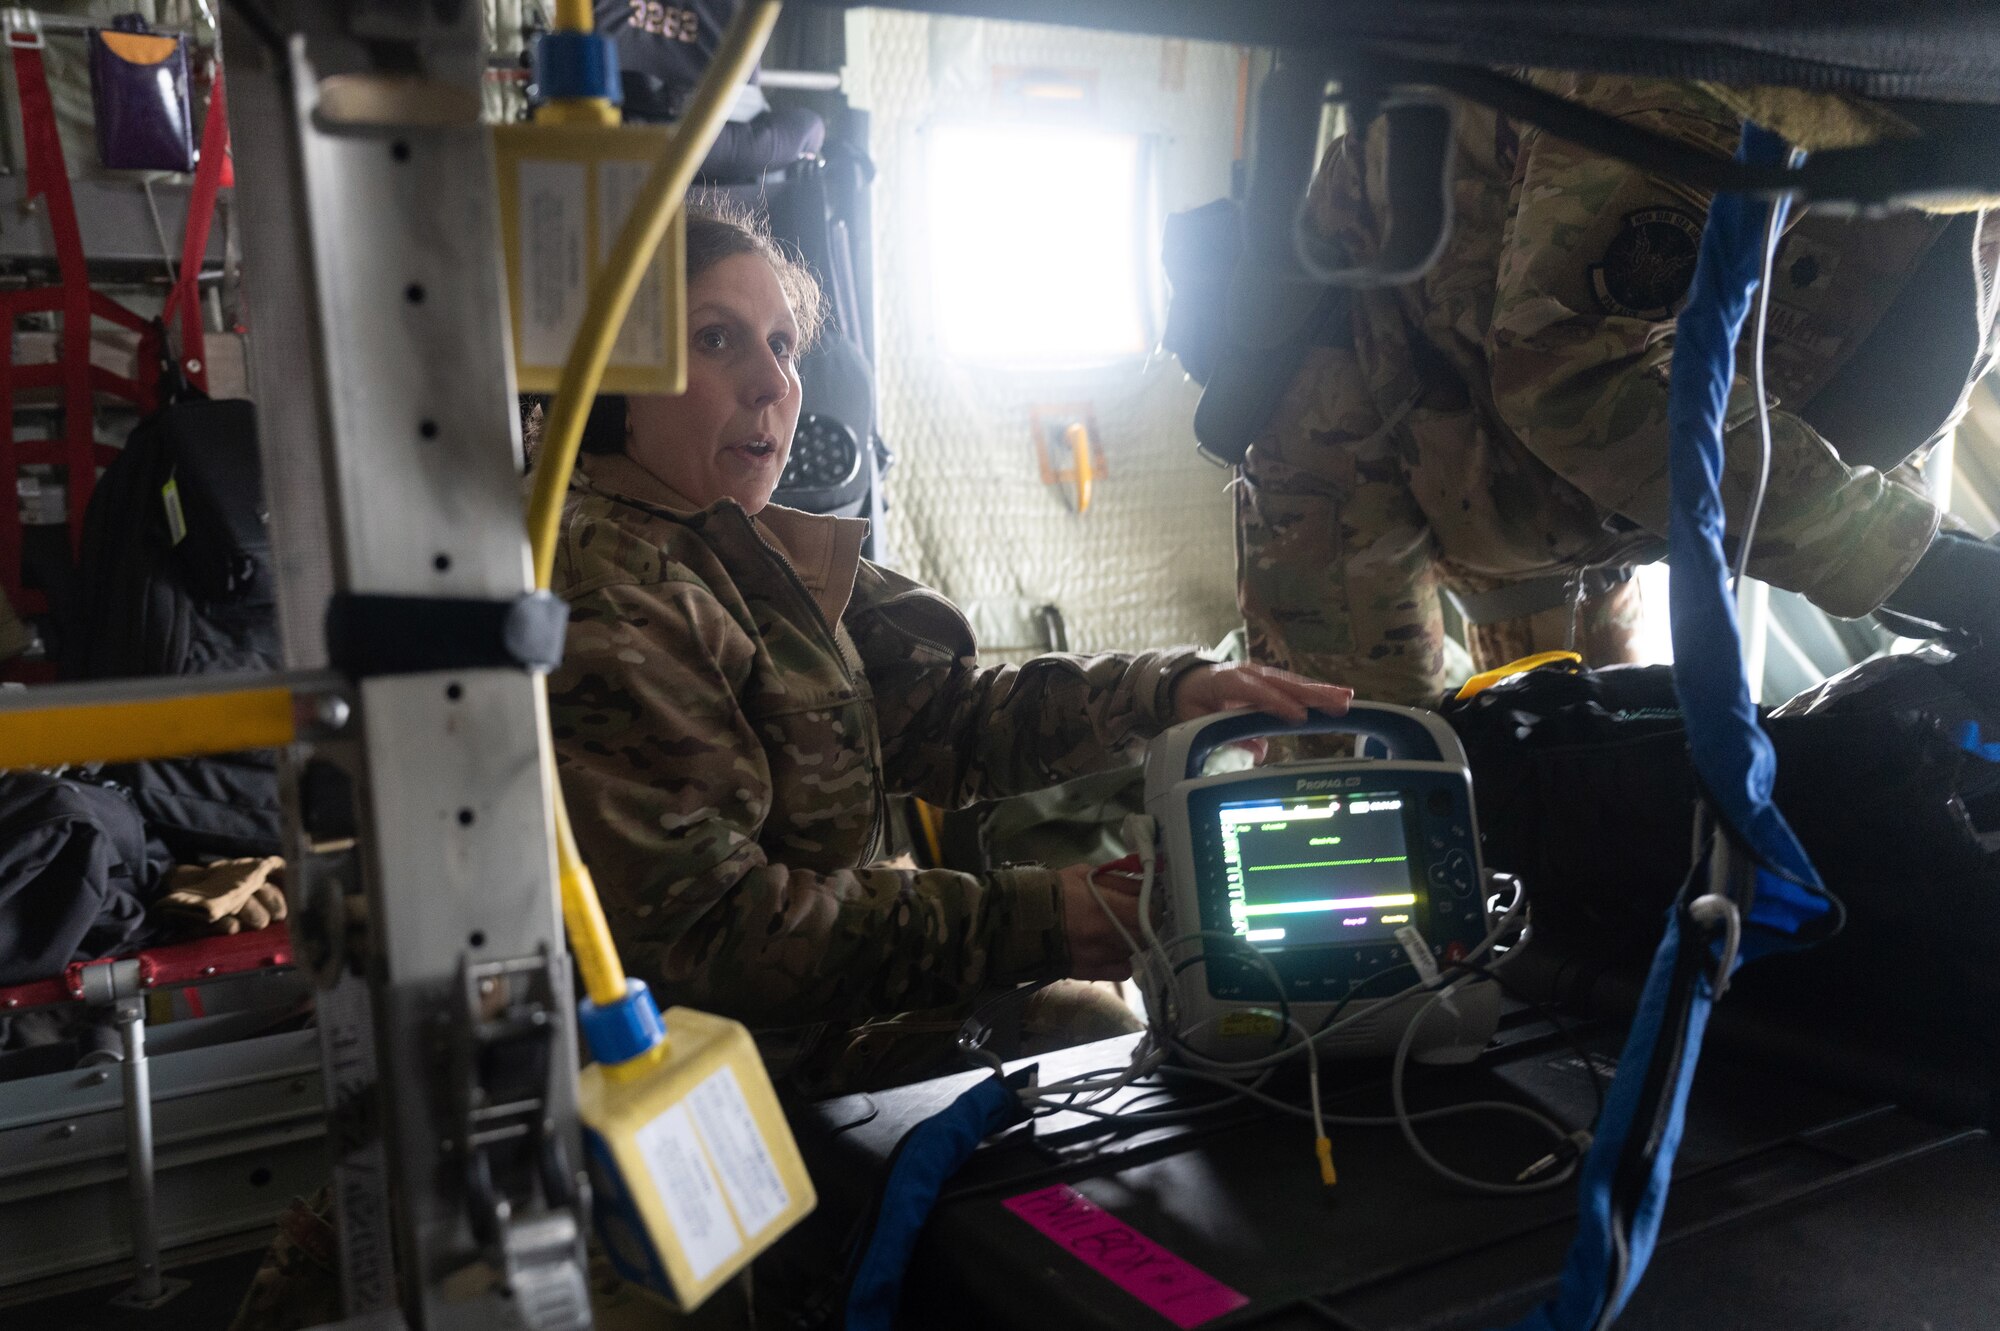 Maj. Christina Pesonen, a 934th Critical Care Air Transportation Team nurse practitioner, checks subjects vitals during exercise Viking Shield, at Volk Field Air National Guard Base, Wis., April 7, 2022. Viking Shield is a 934th Airlift Wing led exercise designed to strengthen training in a degraded environment. (U.S. Air Force photo by Airman 1st Class Colten Tessness)